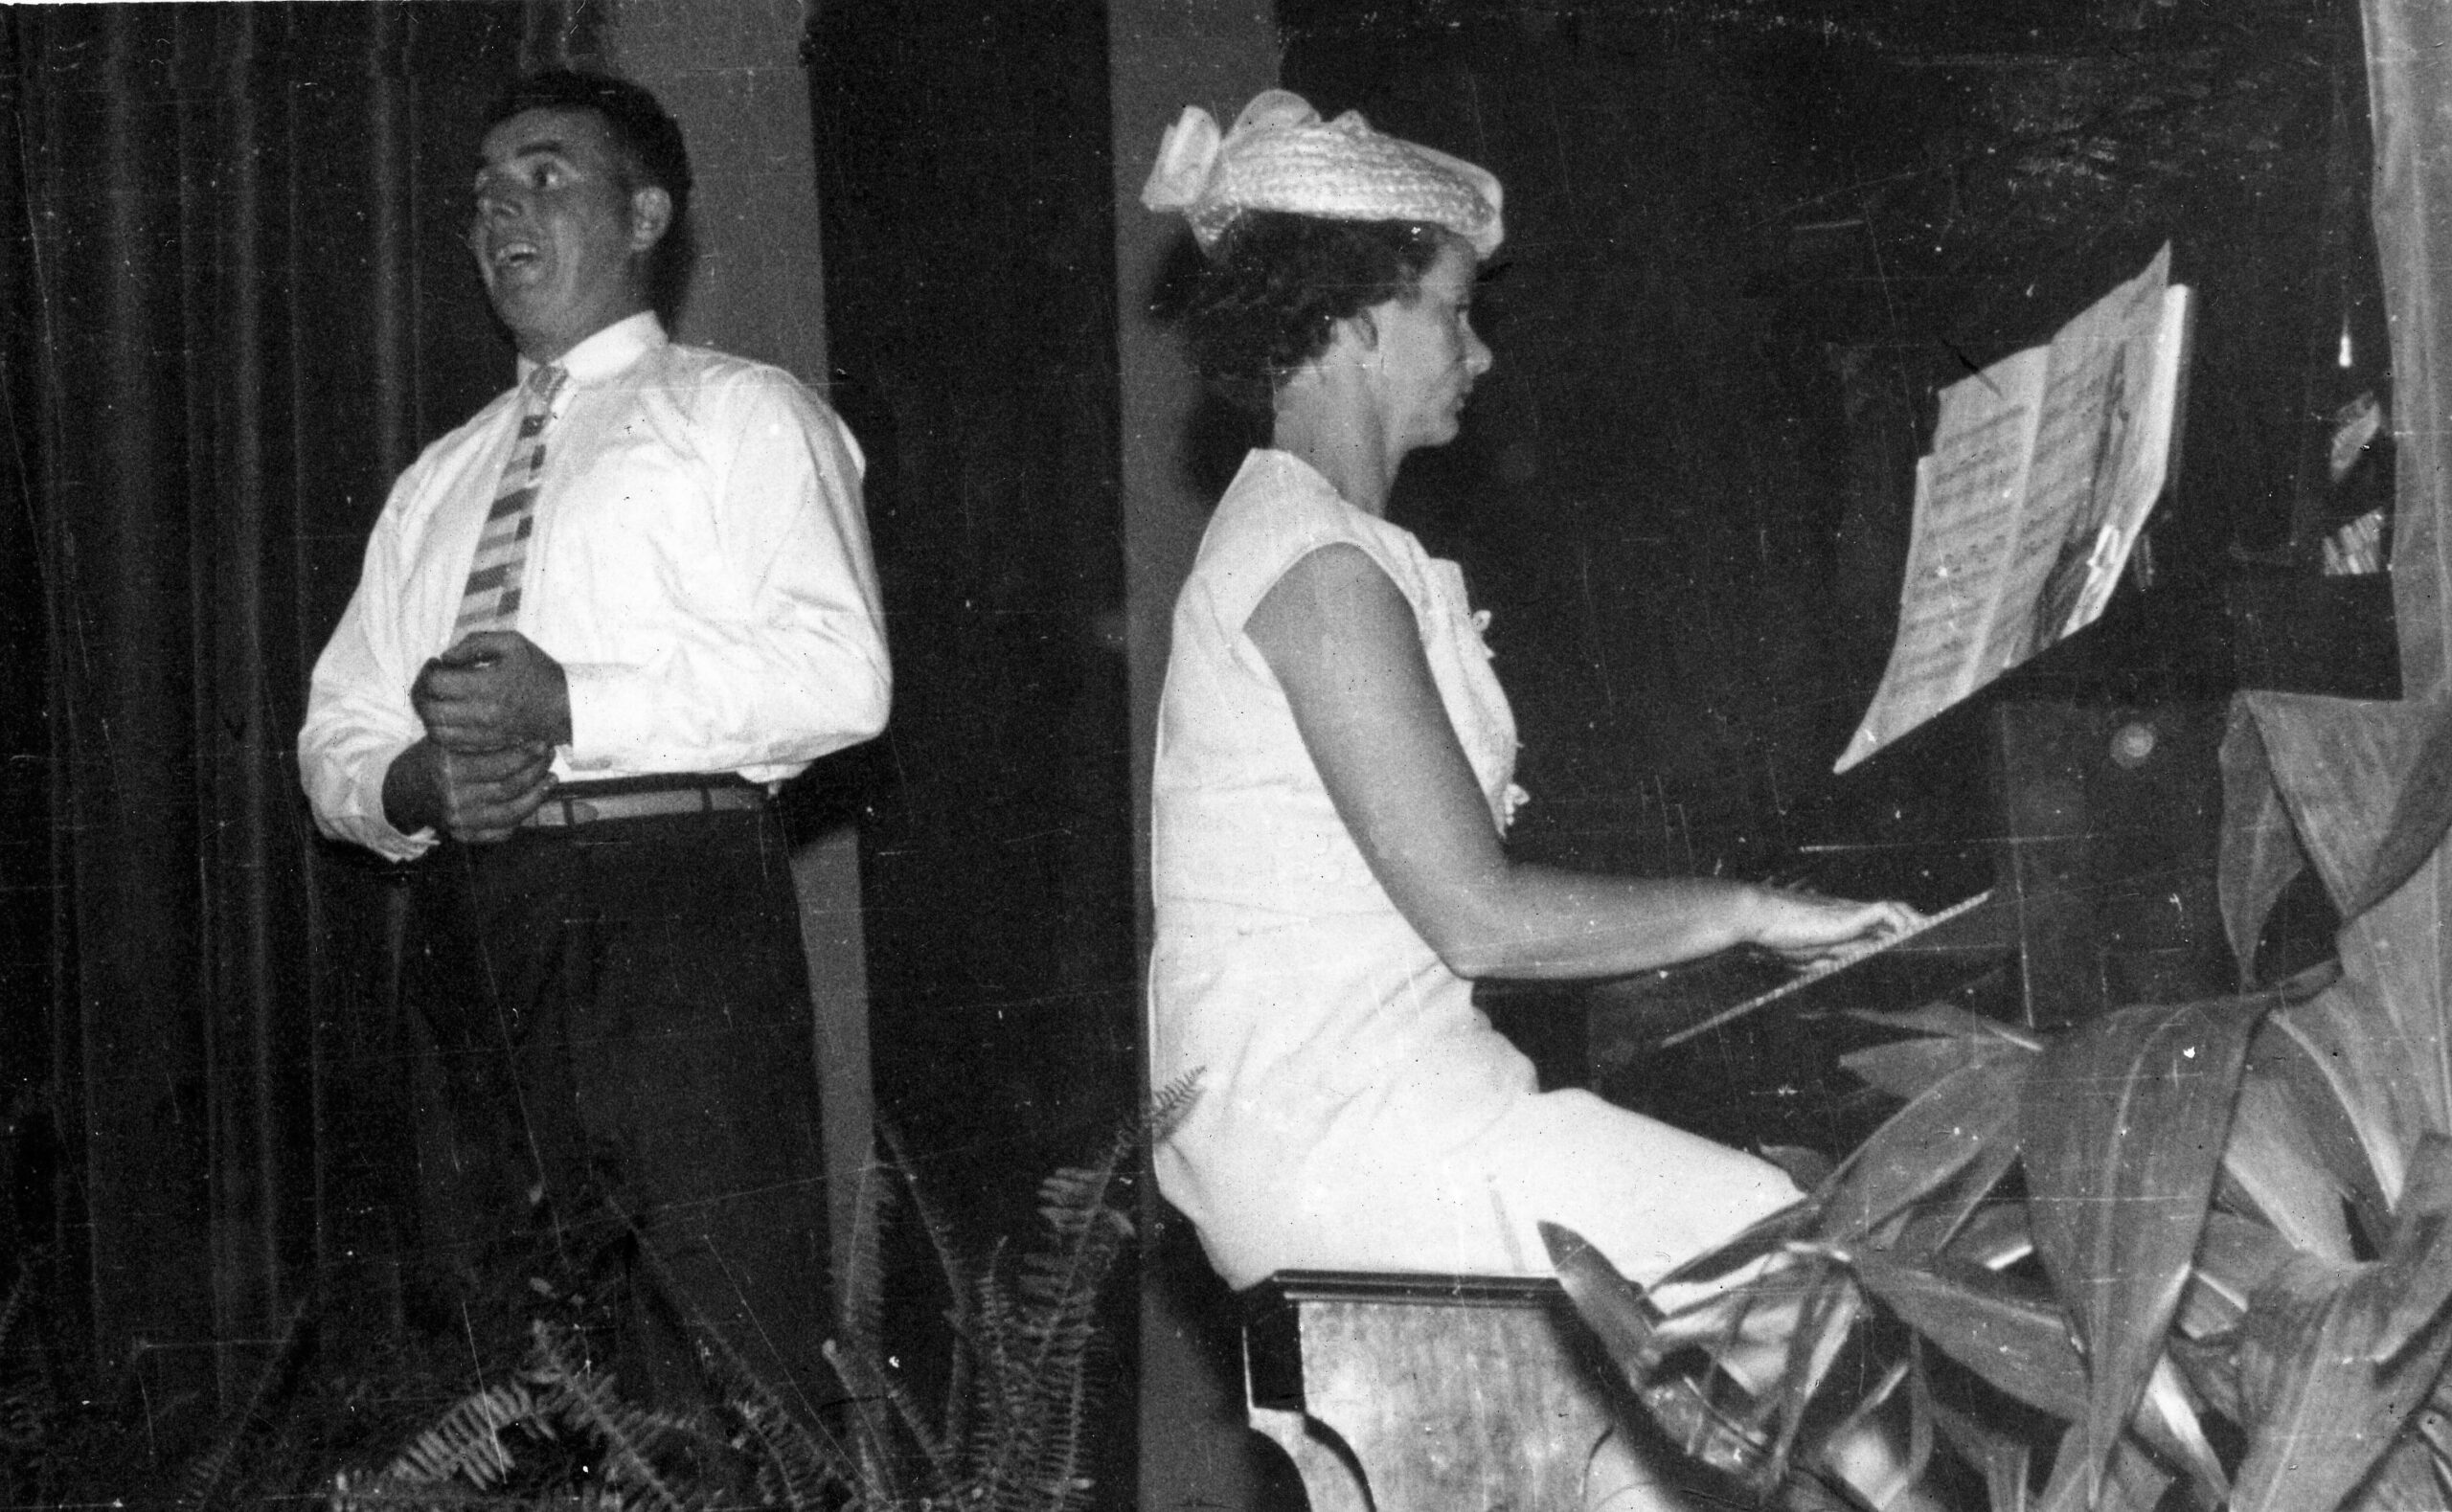 Bill and Beryl Heath performing on stage at a concert.